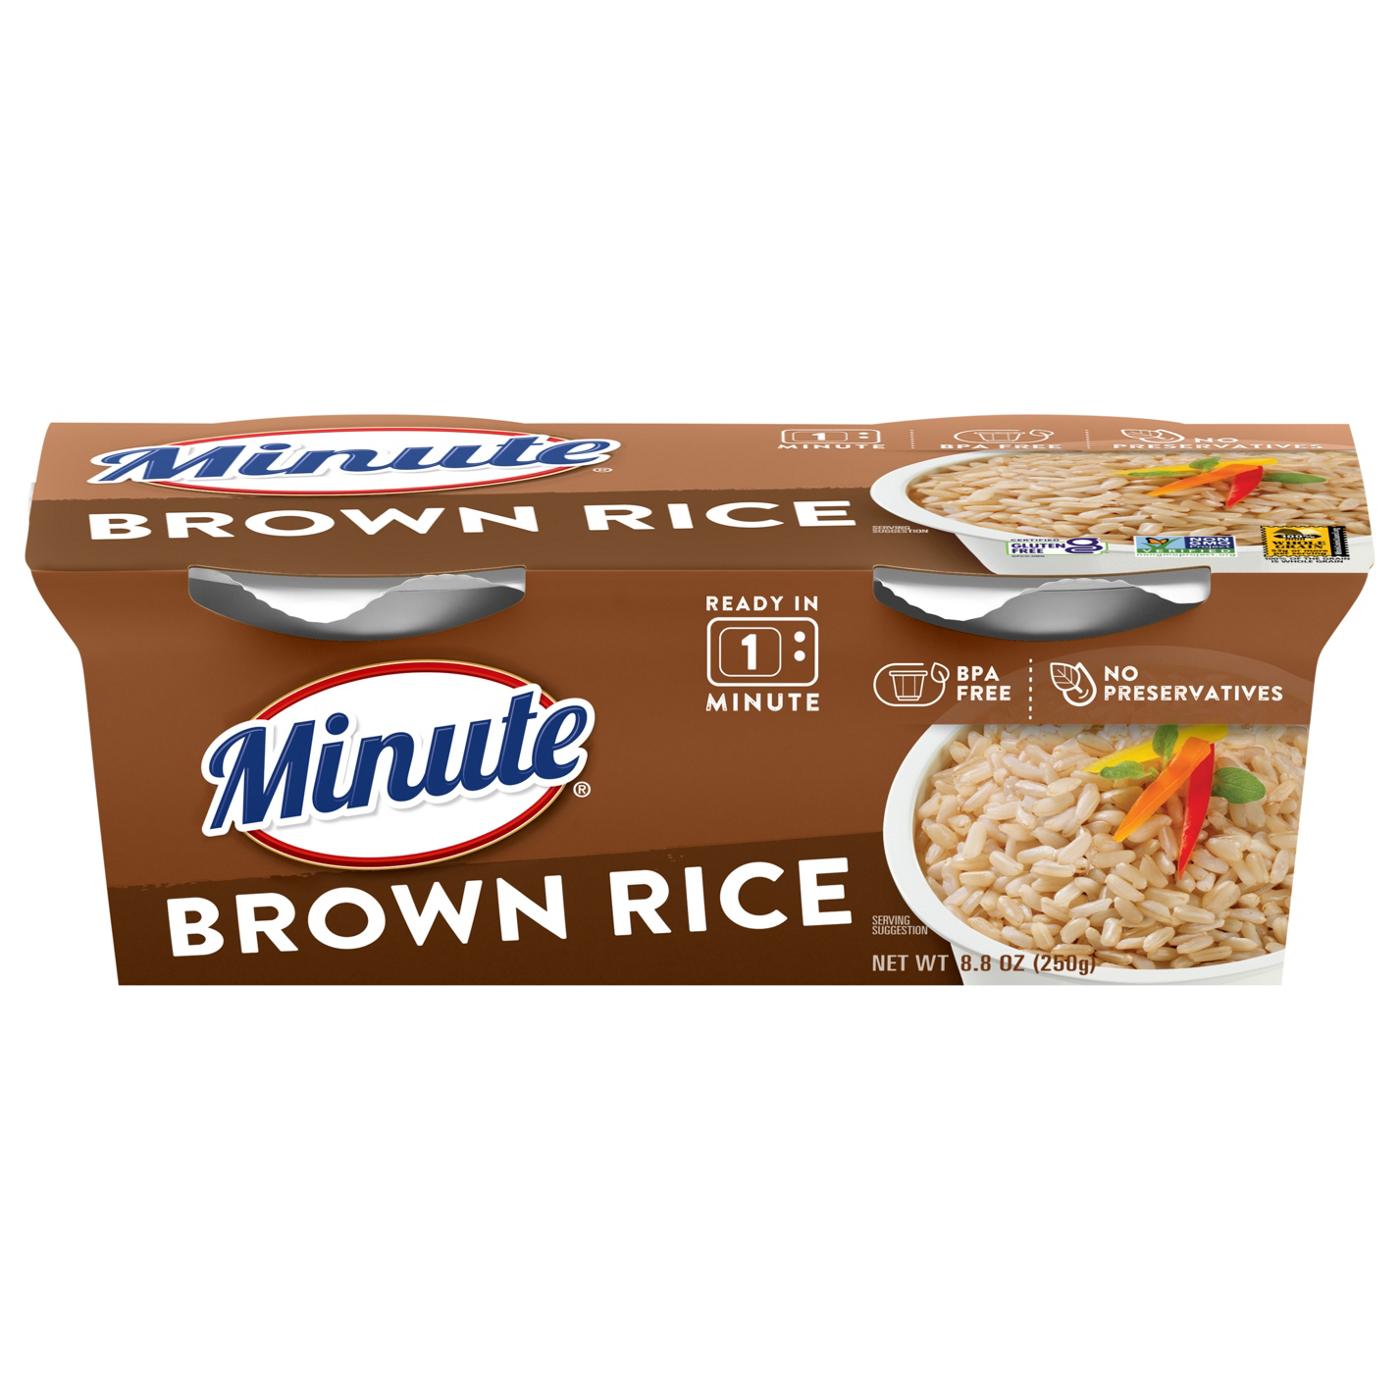 Minute Ready to Serve Brown Rice; image 1 of 7